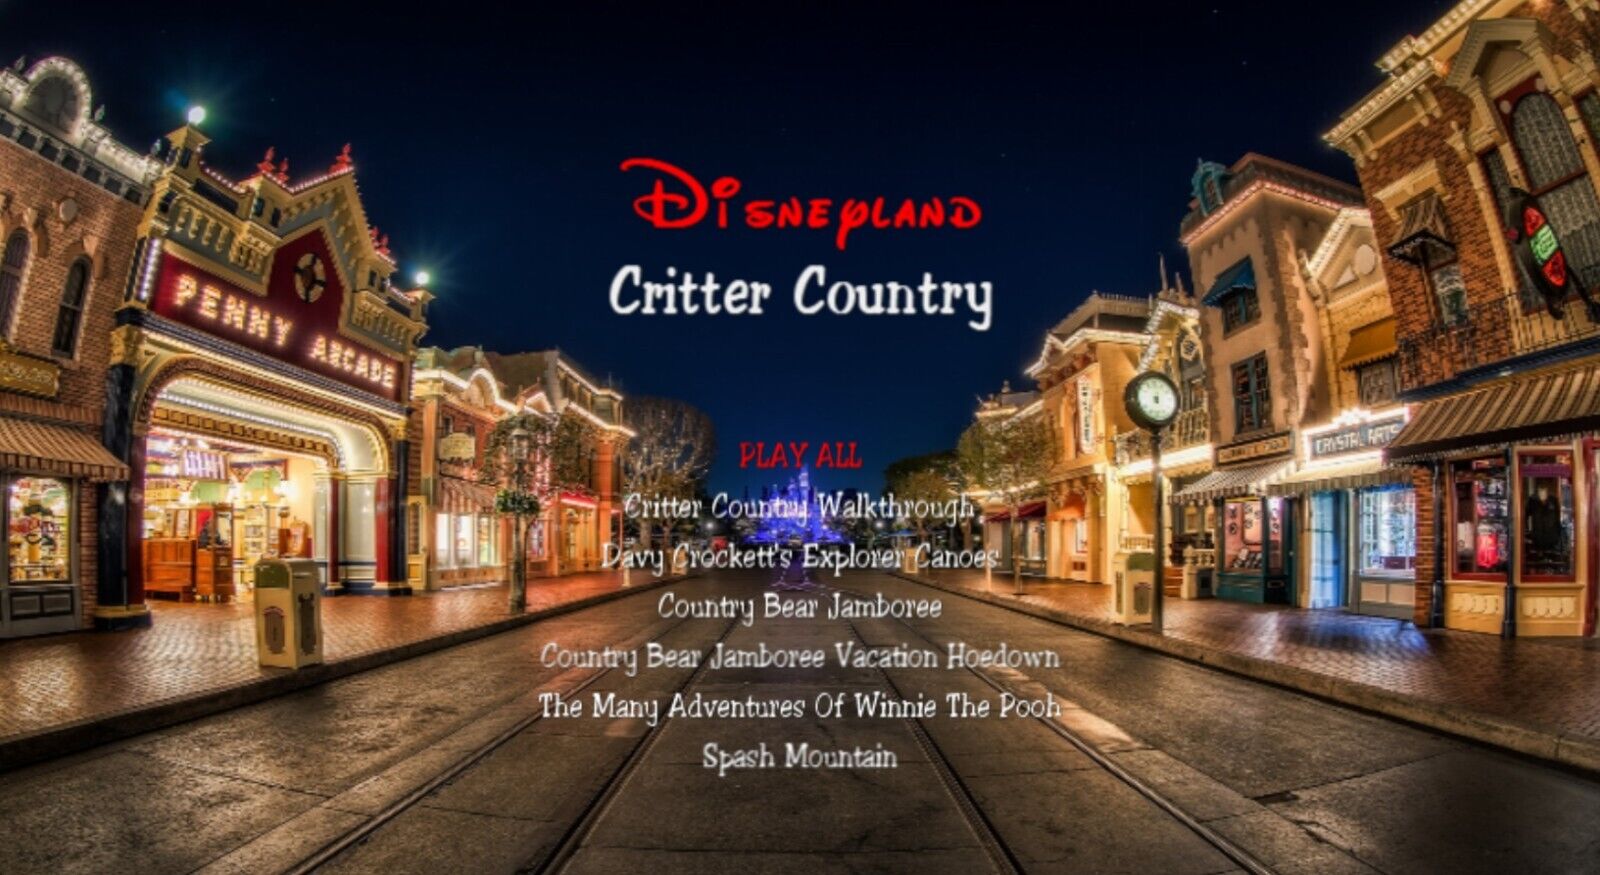 Disneyland Attractions DVD 07 - Critter Country